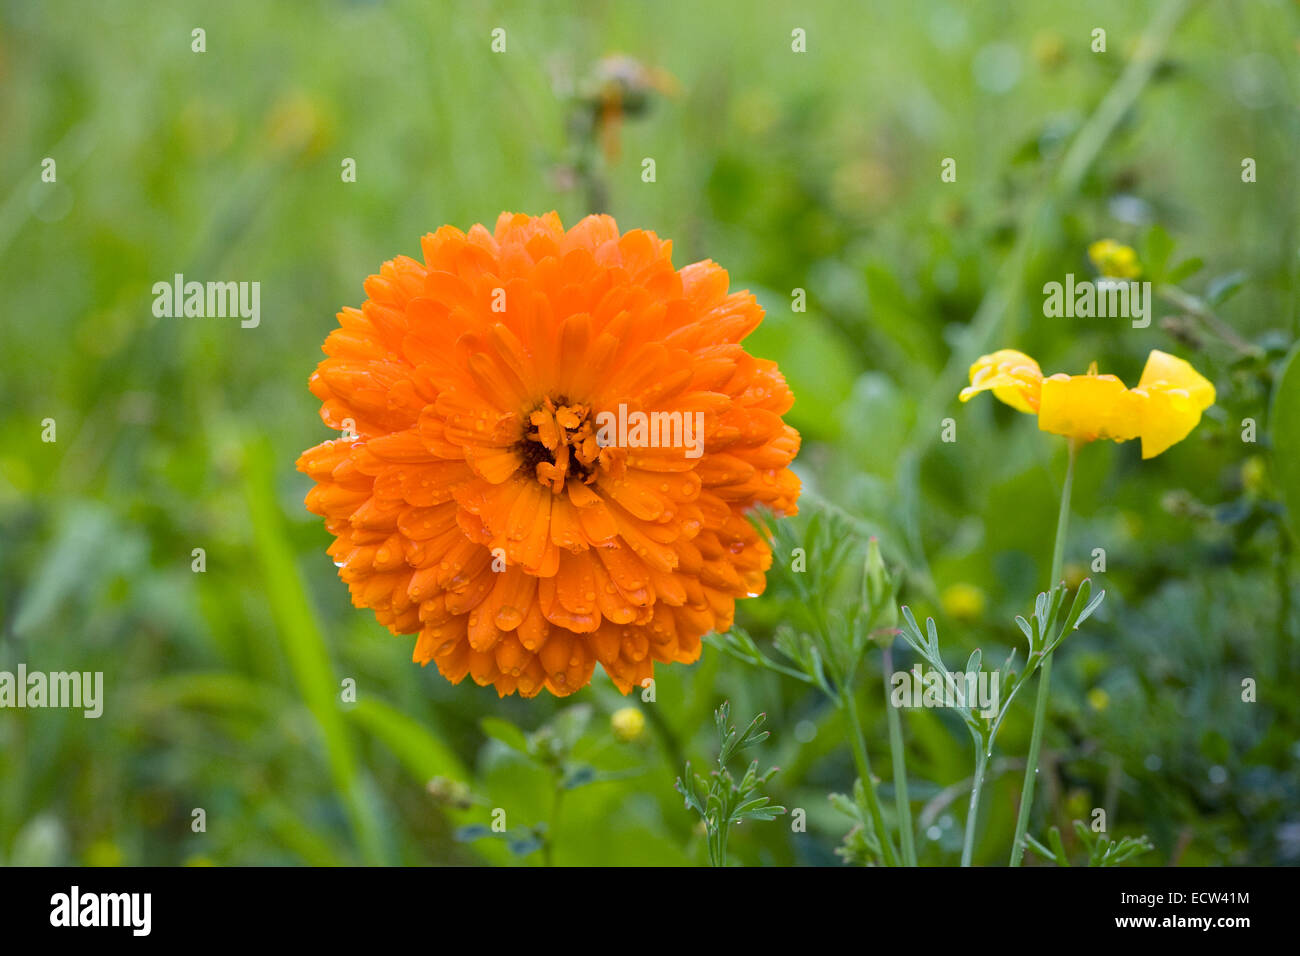 Calendula officinalis. French marigold flower. Banque D'Images